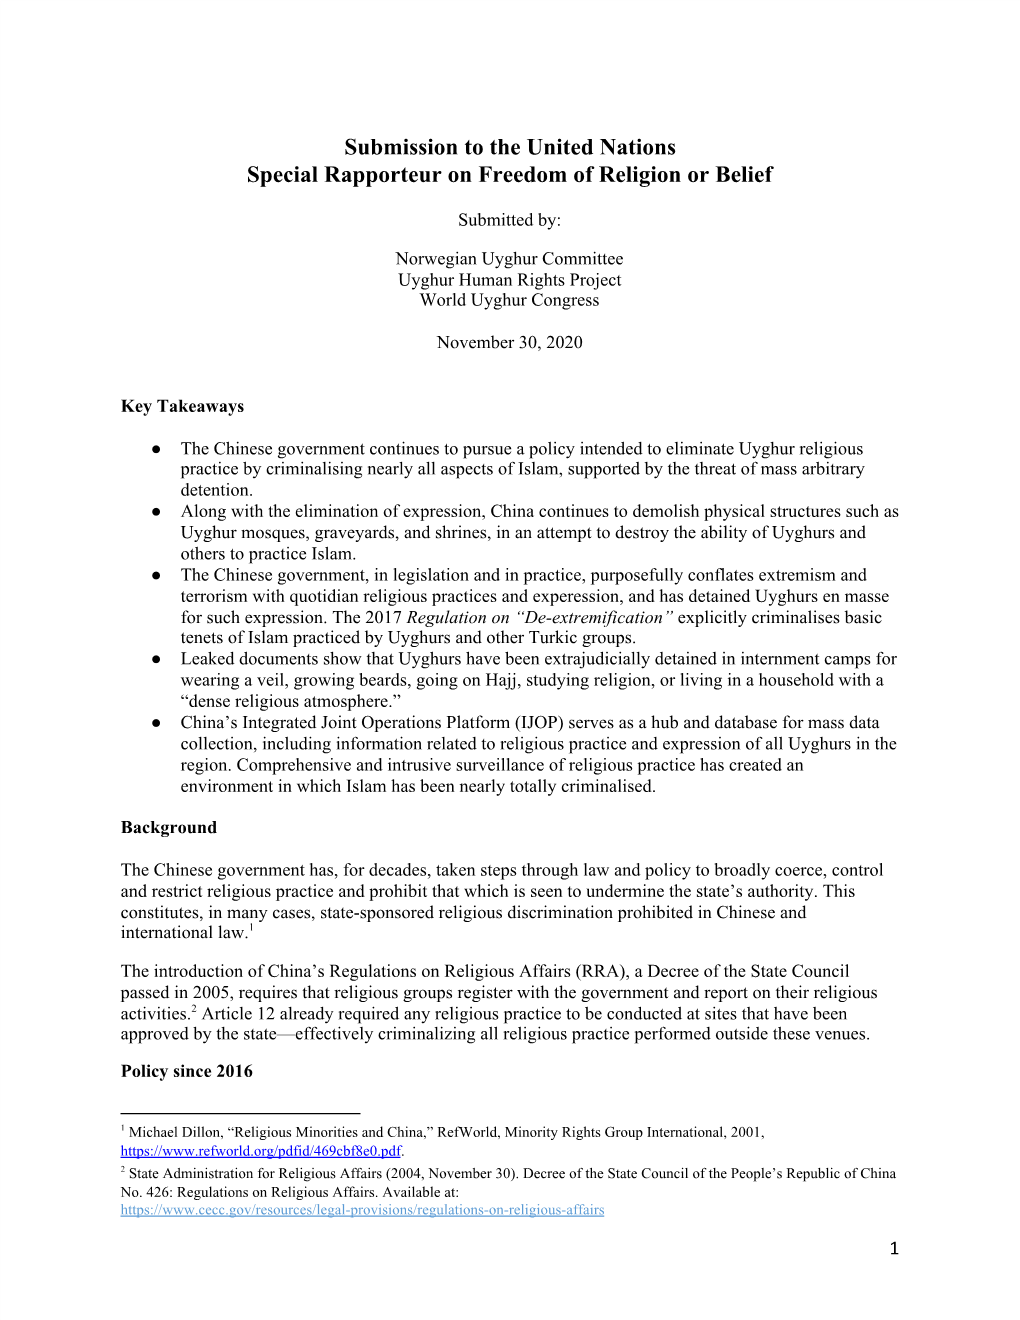 Submission to the United Nations Special Rapporteur on Freedom of Religion Or Belief